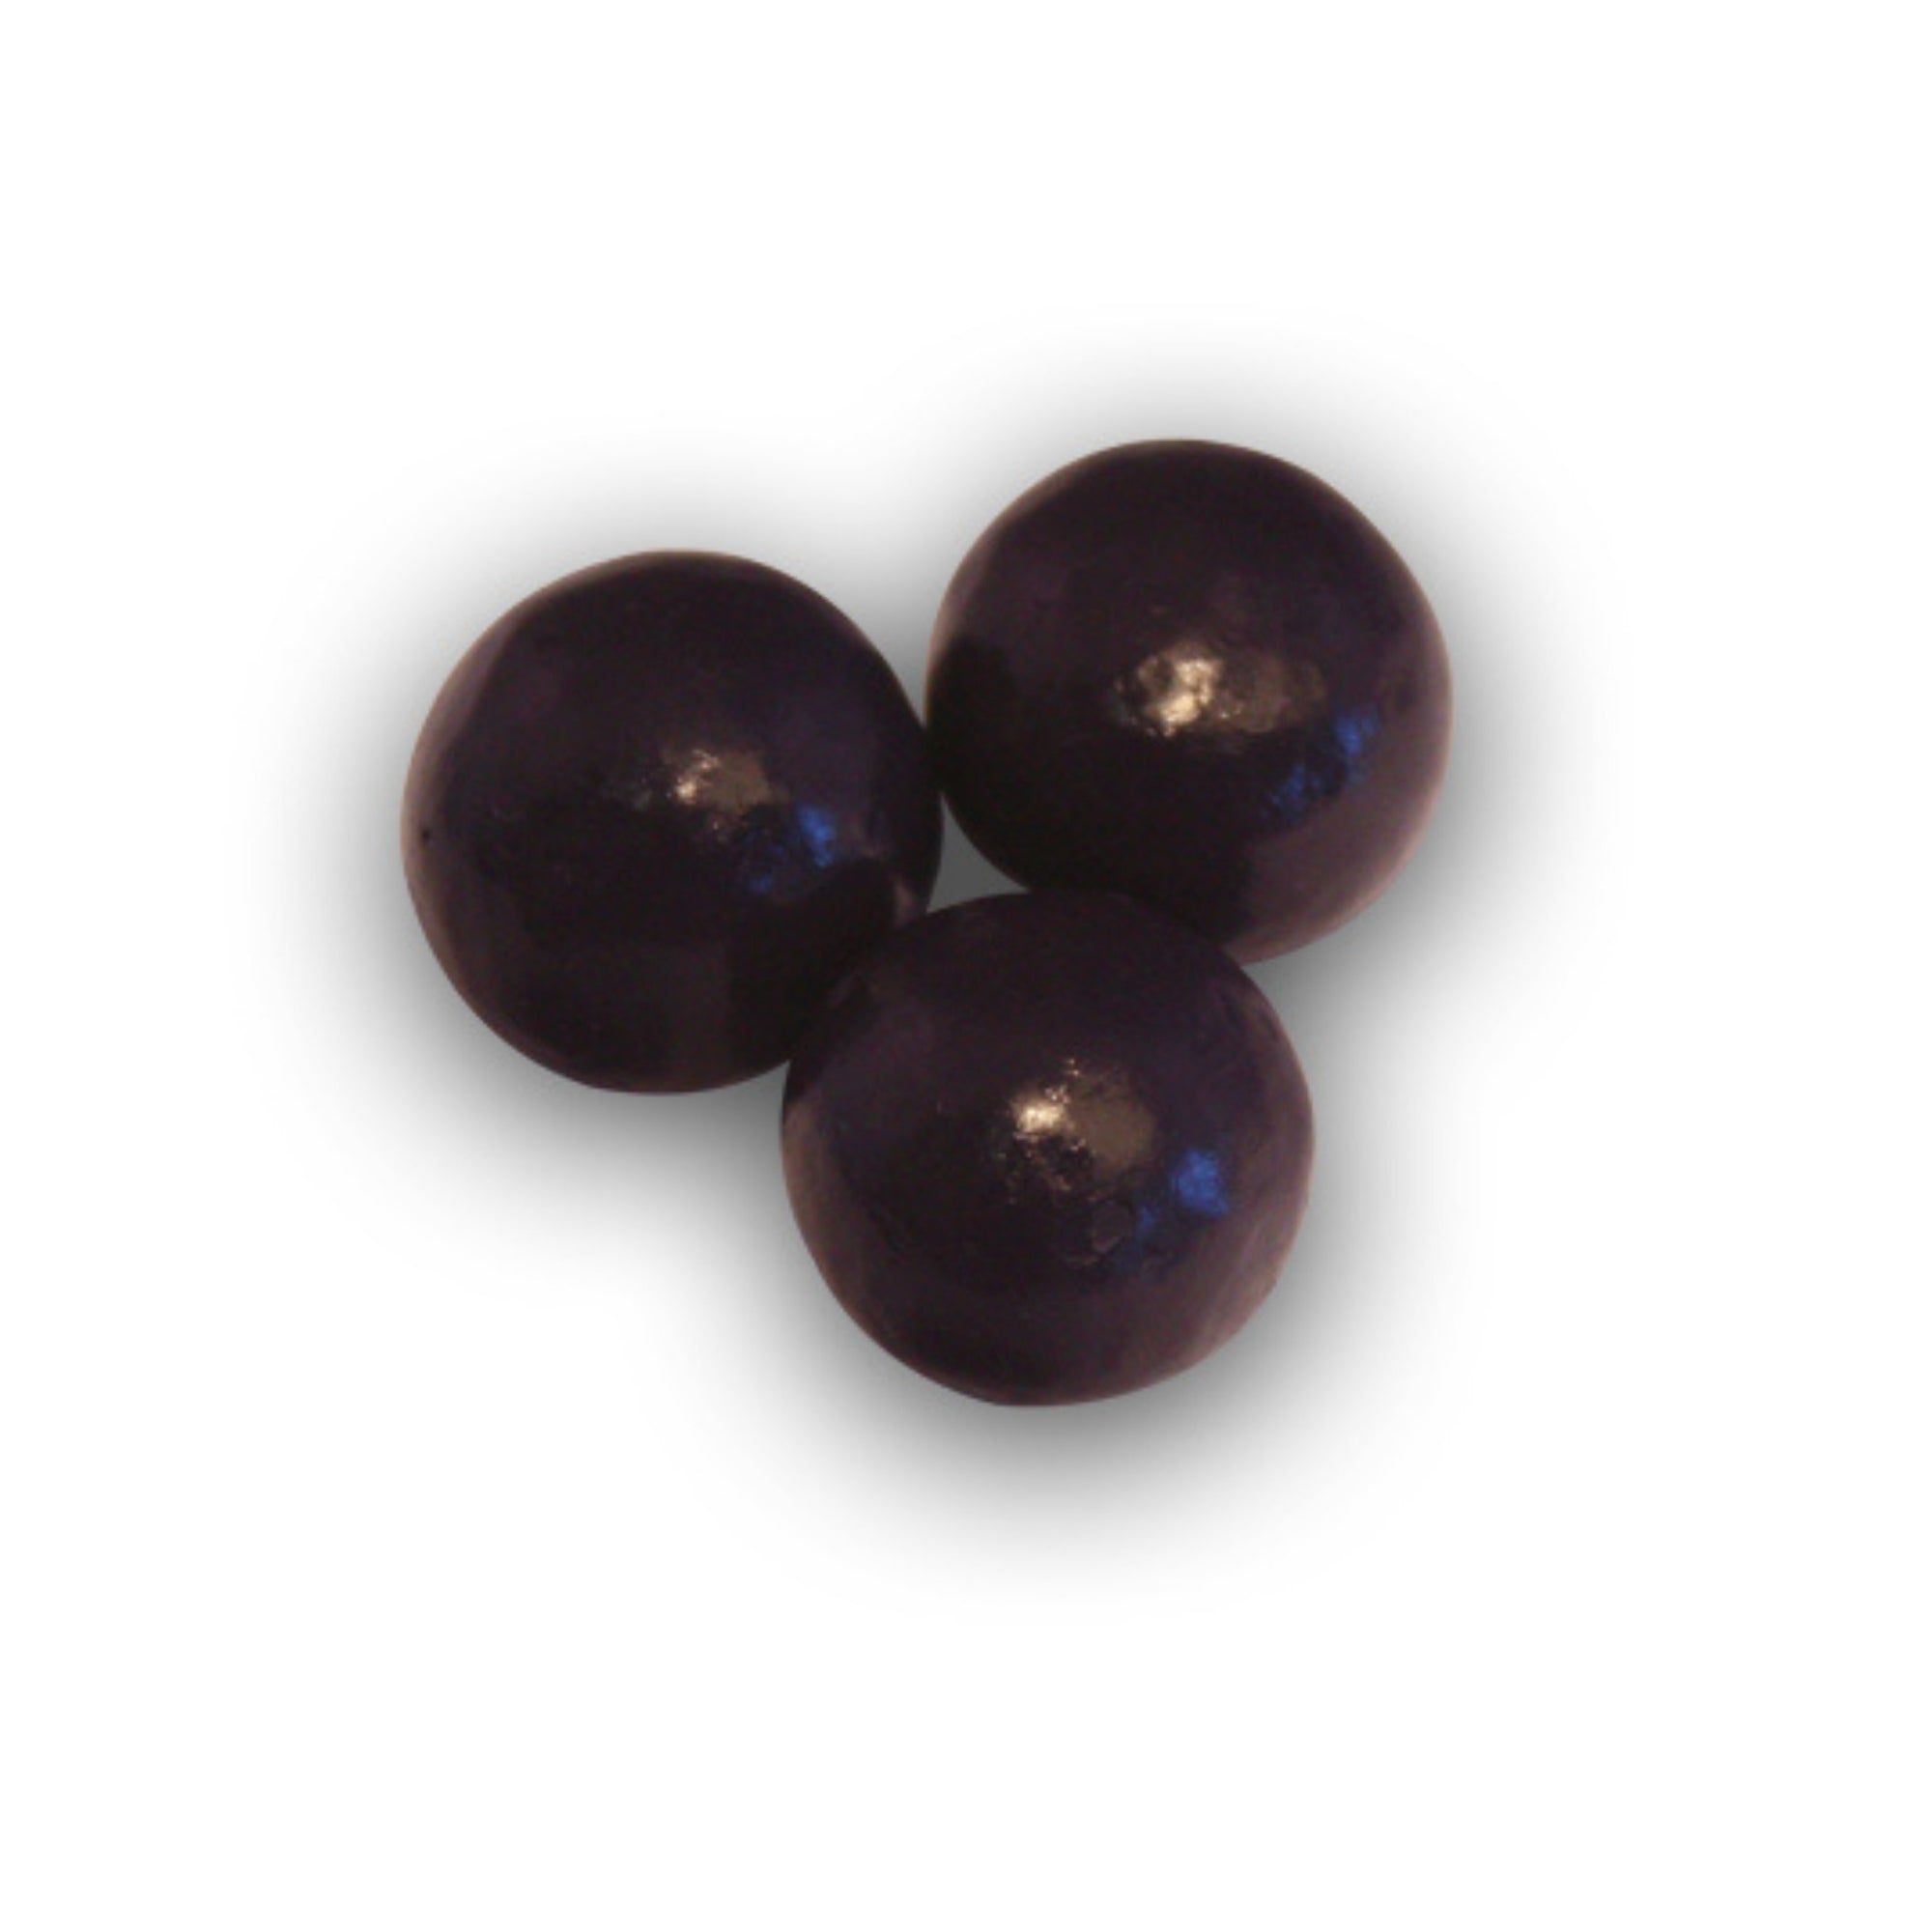 Dilettante Chocolates Chocolate Covered Blueberries in a small 5-ounce pouch